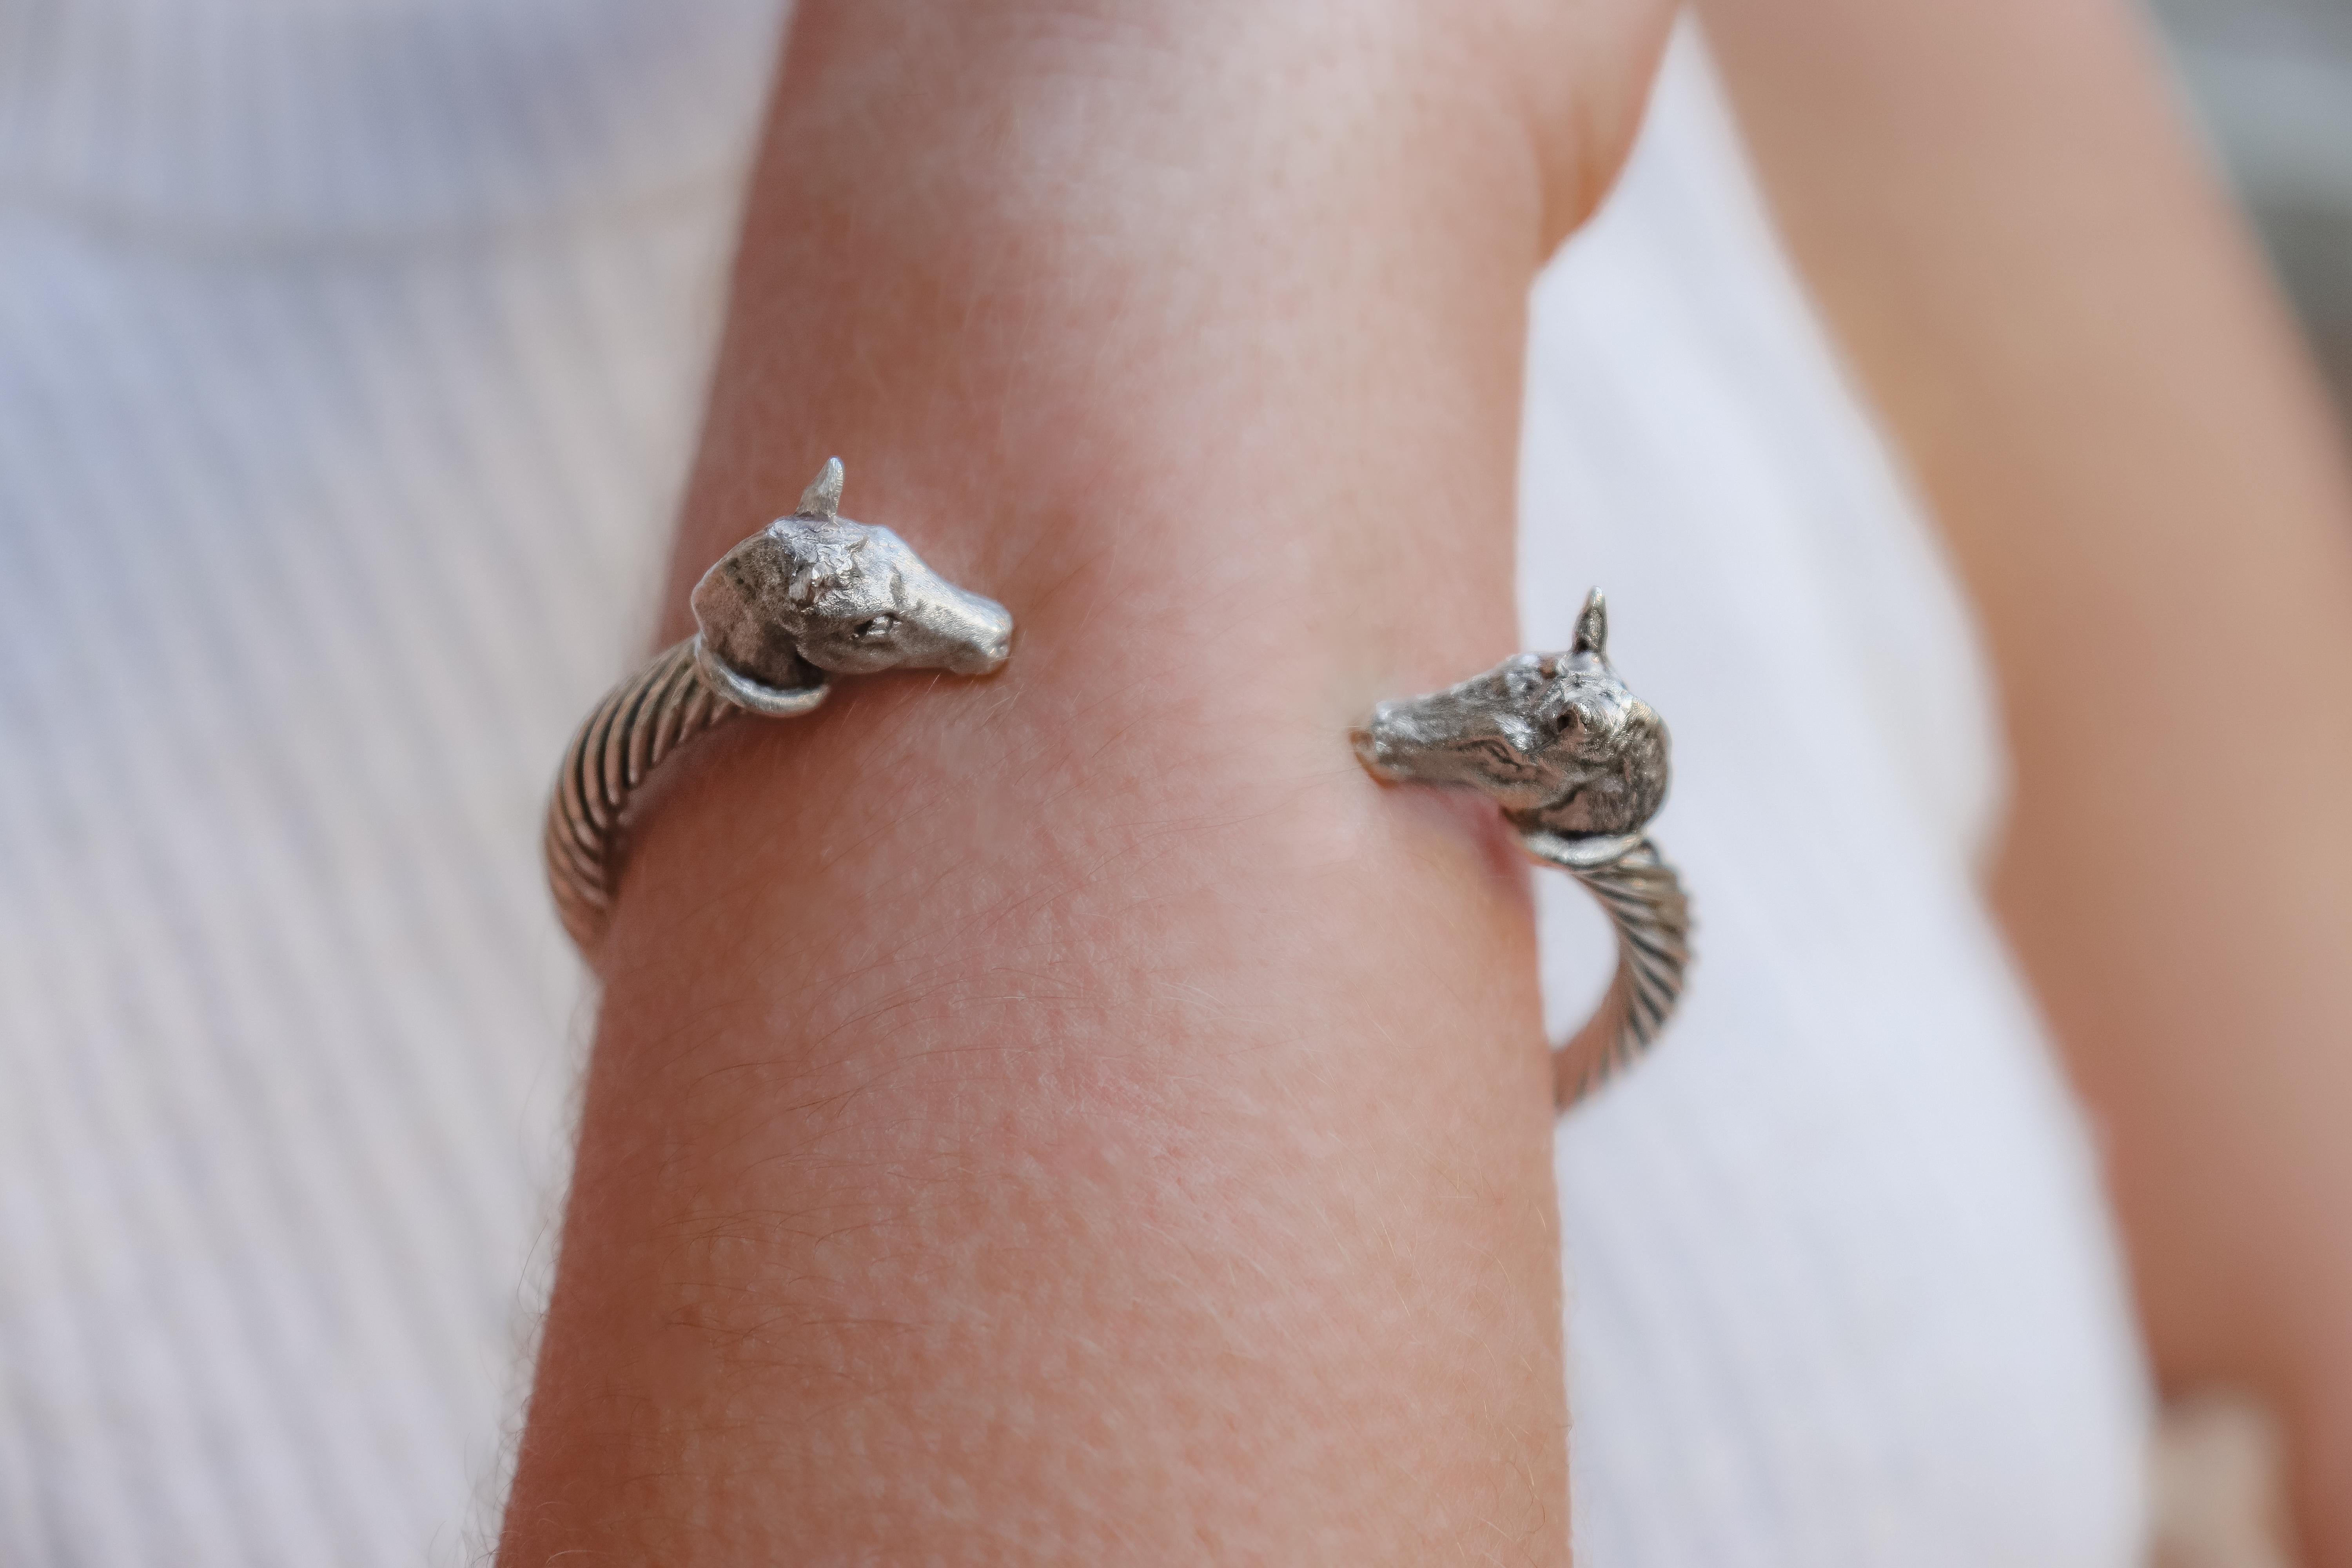 Intricately hand carved miniatures of Pony Heads (details in photos) on a sterling silver twisted bangle are made by England’s Paul Eaton who is possibly the world's best miniature sculptor of dogs and animals and a master gold/silversmith.  Each